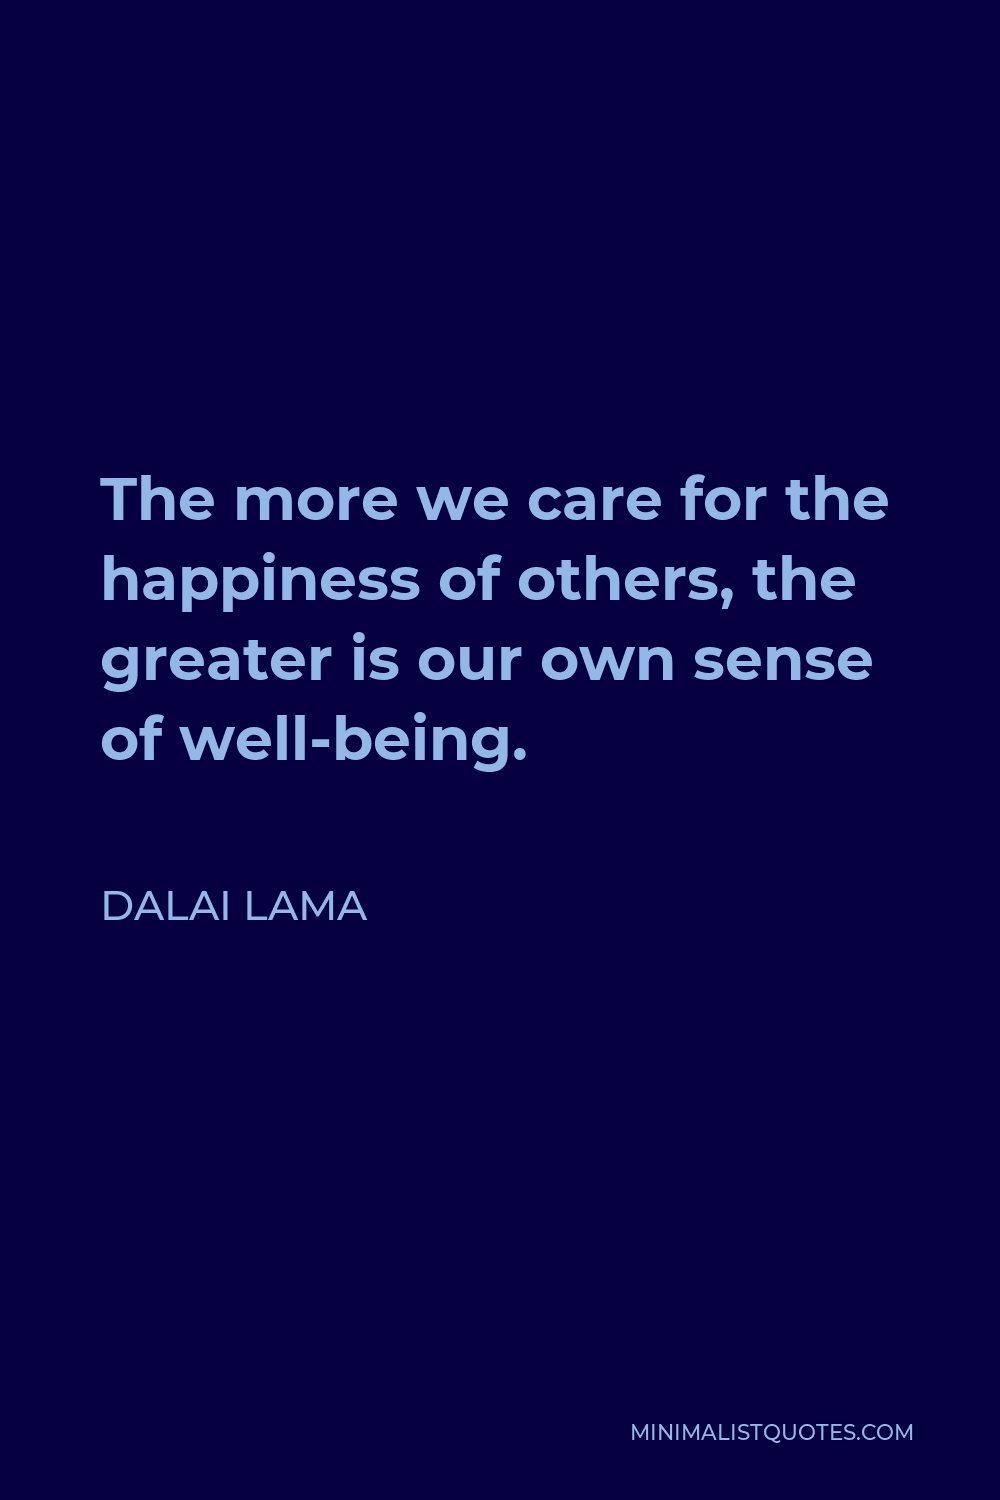 Dalai Lama Quote - The more we care for the happiness of others, the greater is our own sense of well-being.